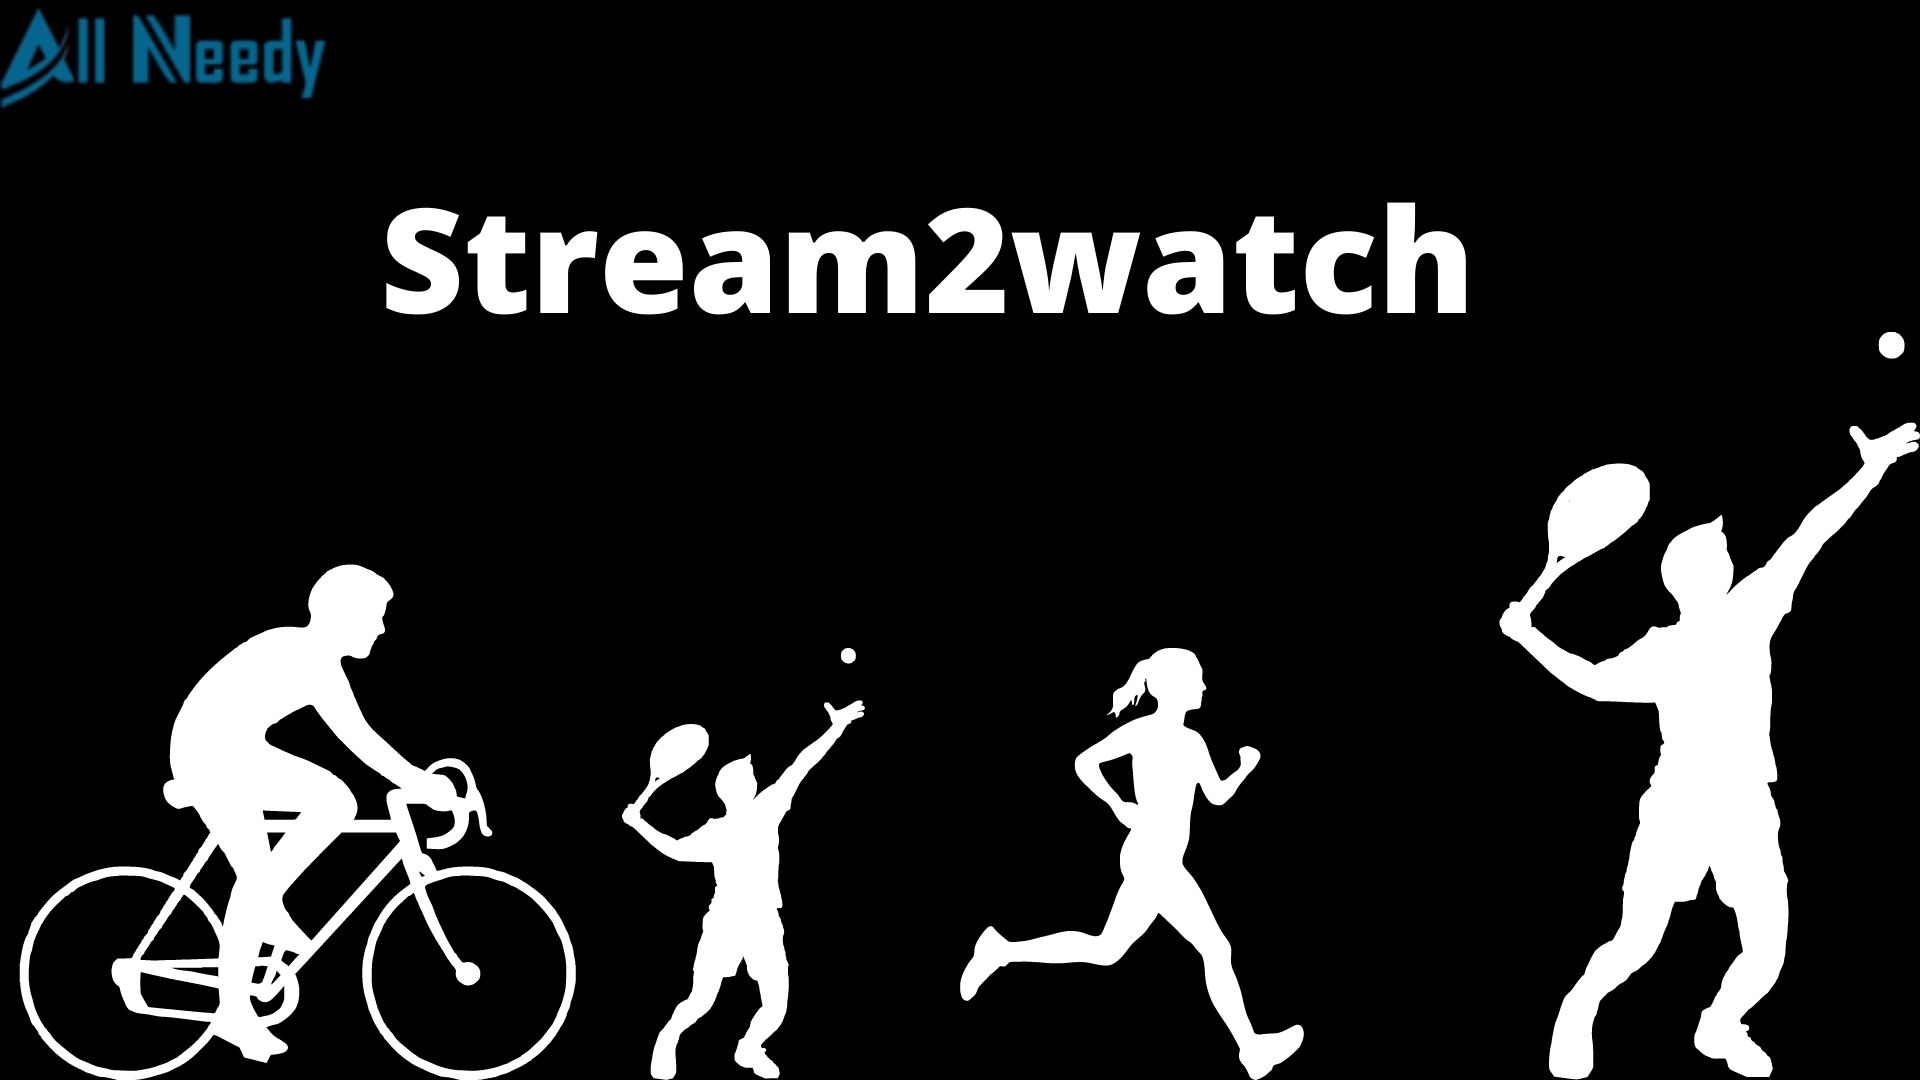 Everything You Need to Know About Stream2Watch